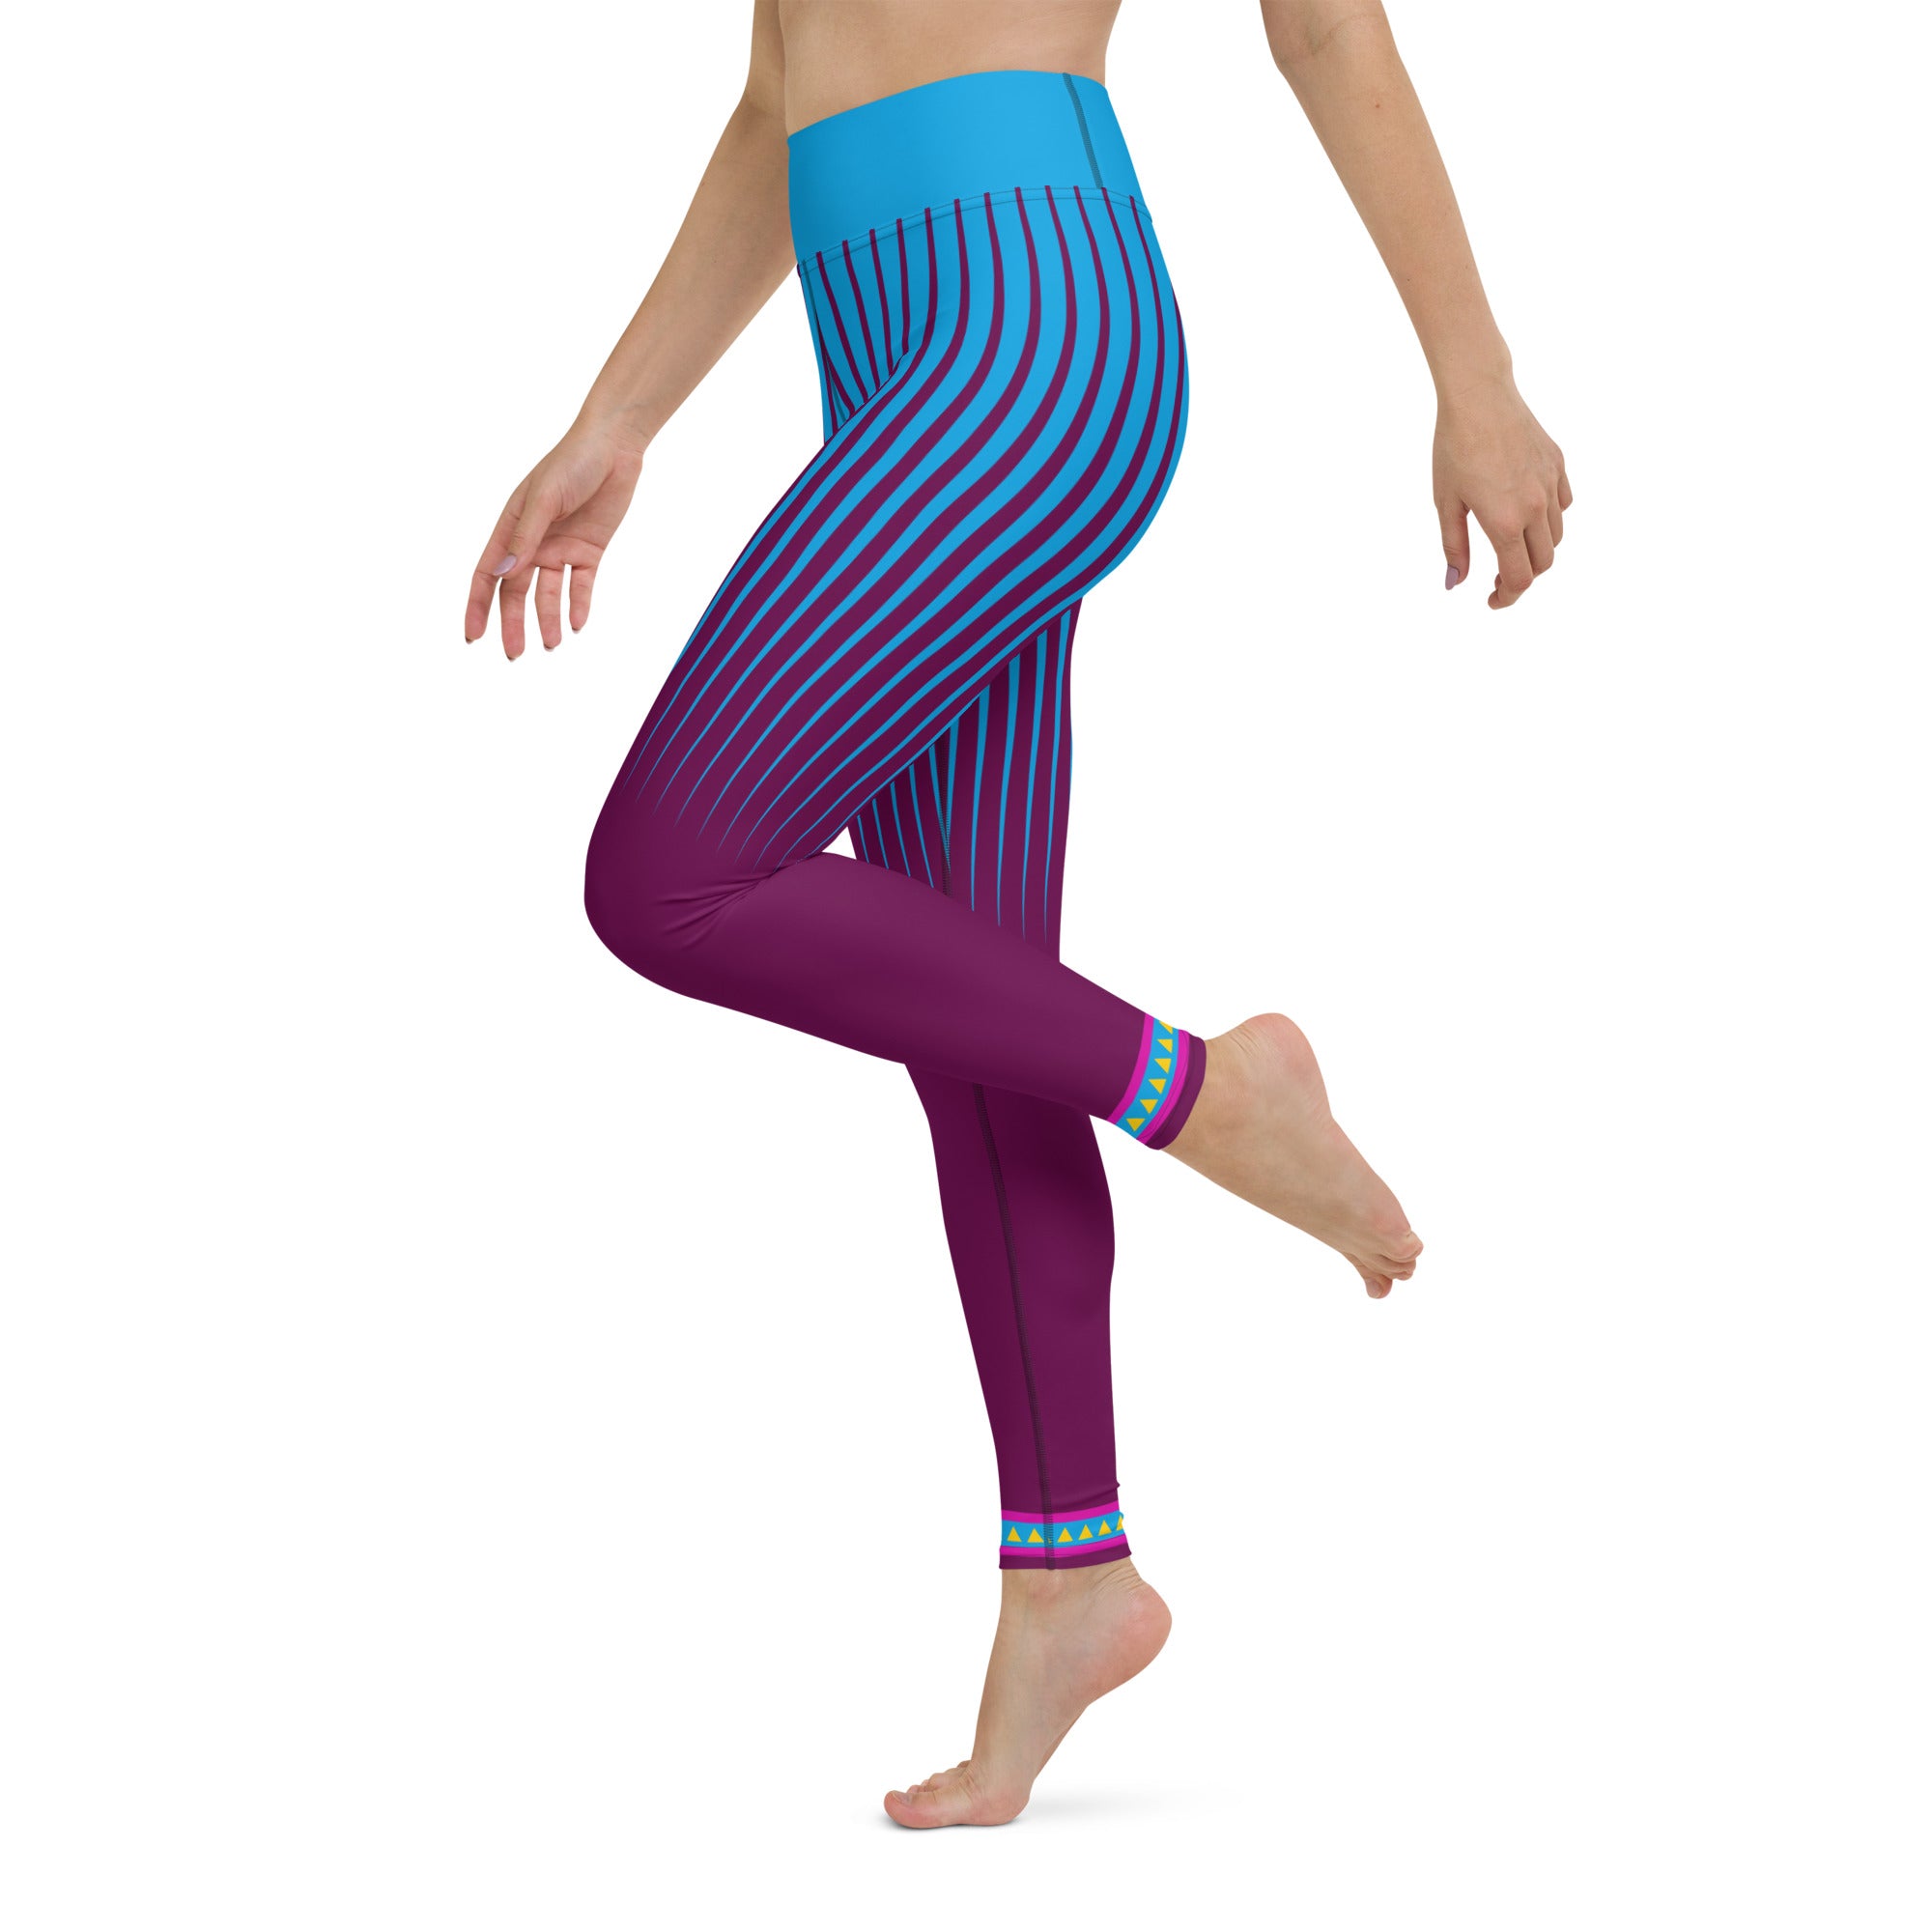 Topaz Tranquility Yoga Leggings product packaging.